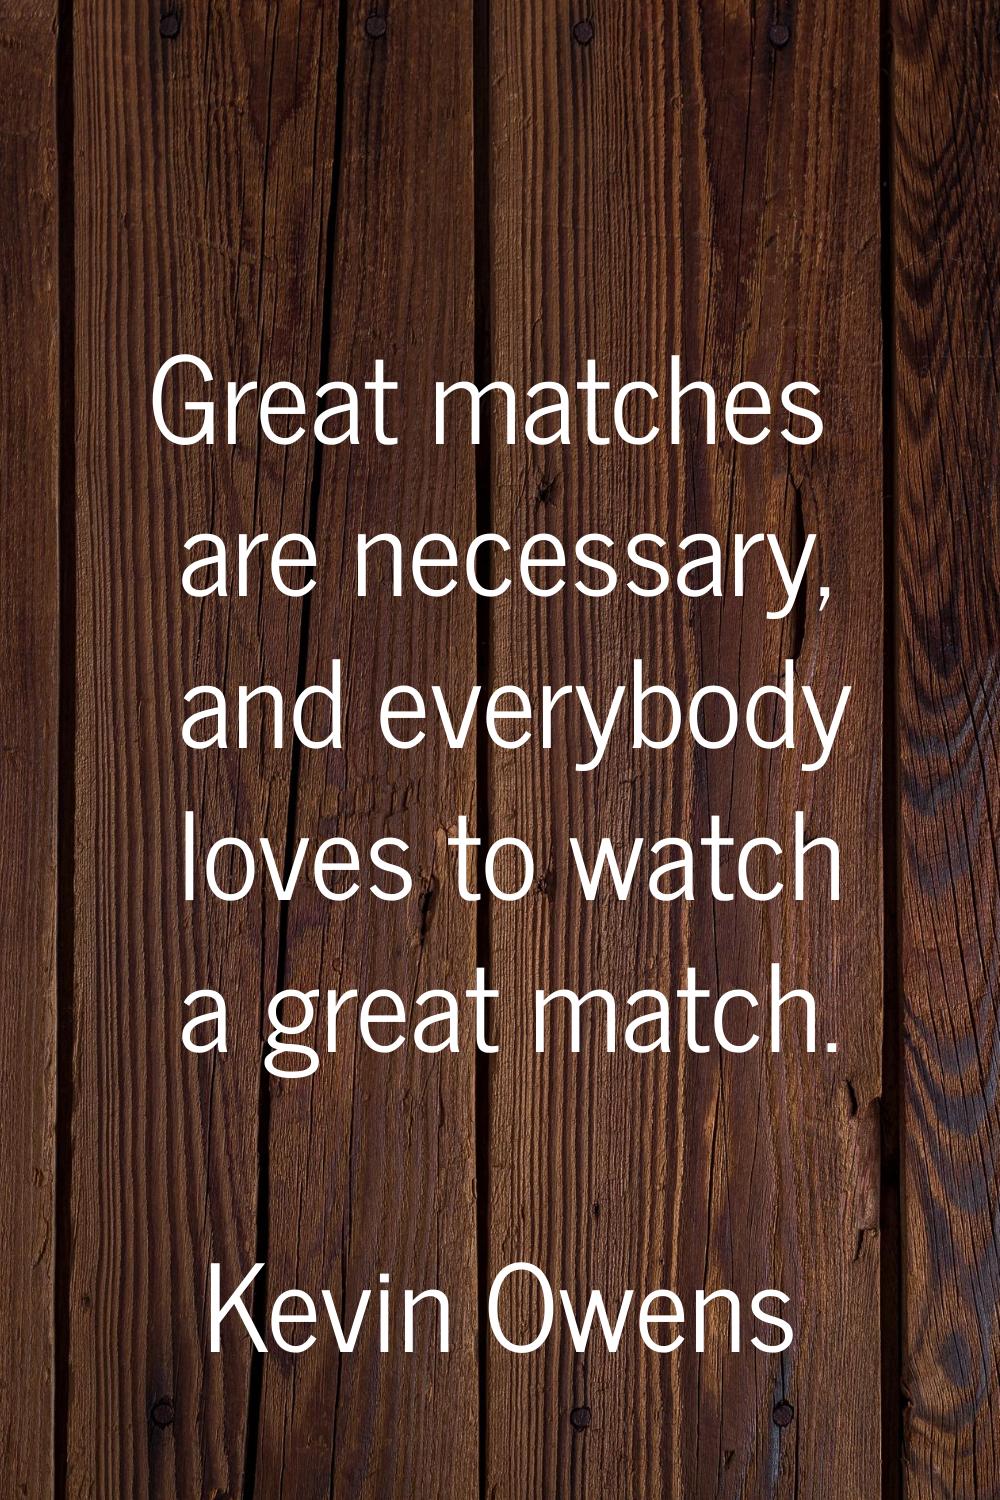 Great matches are necessary, and everybody loves to watch a great match.